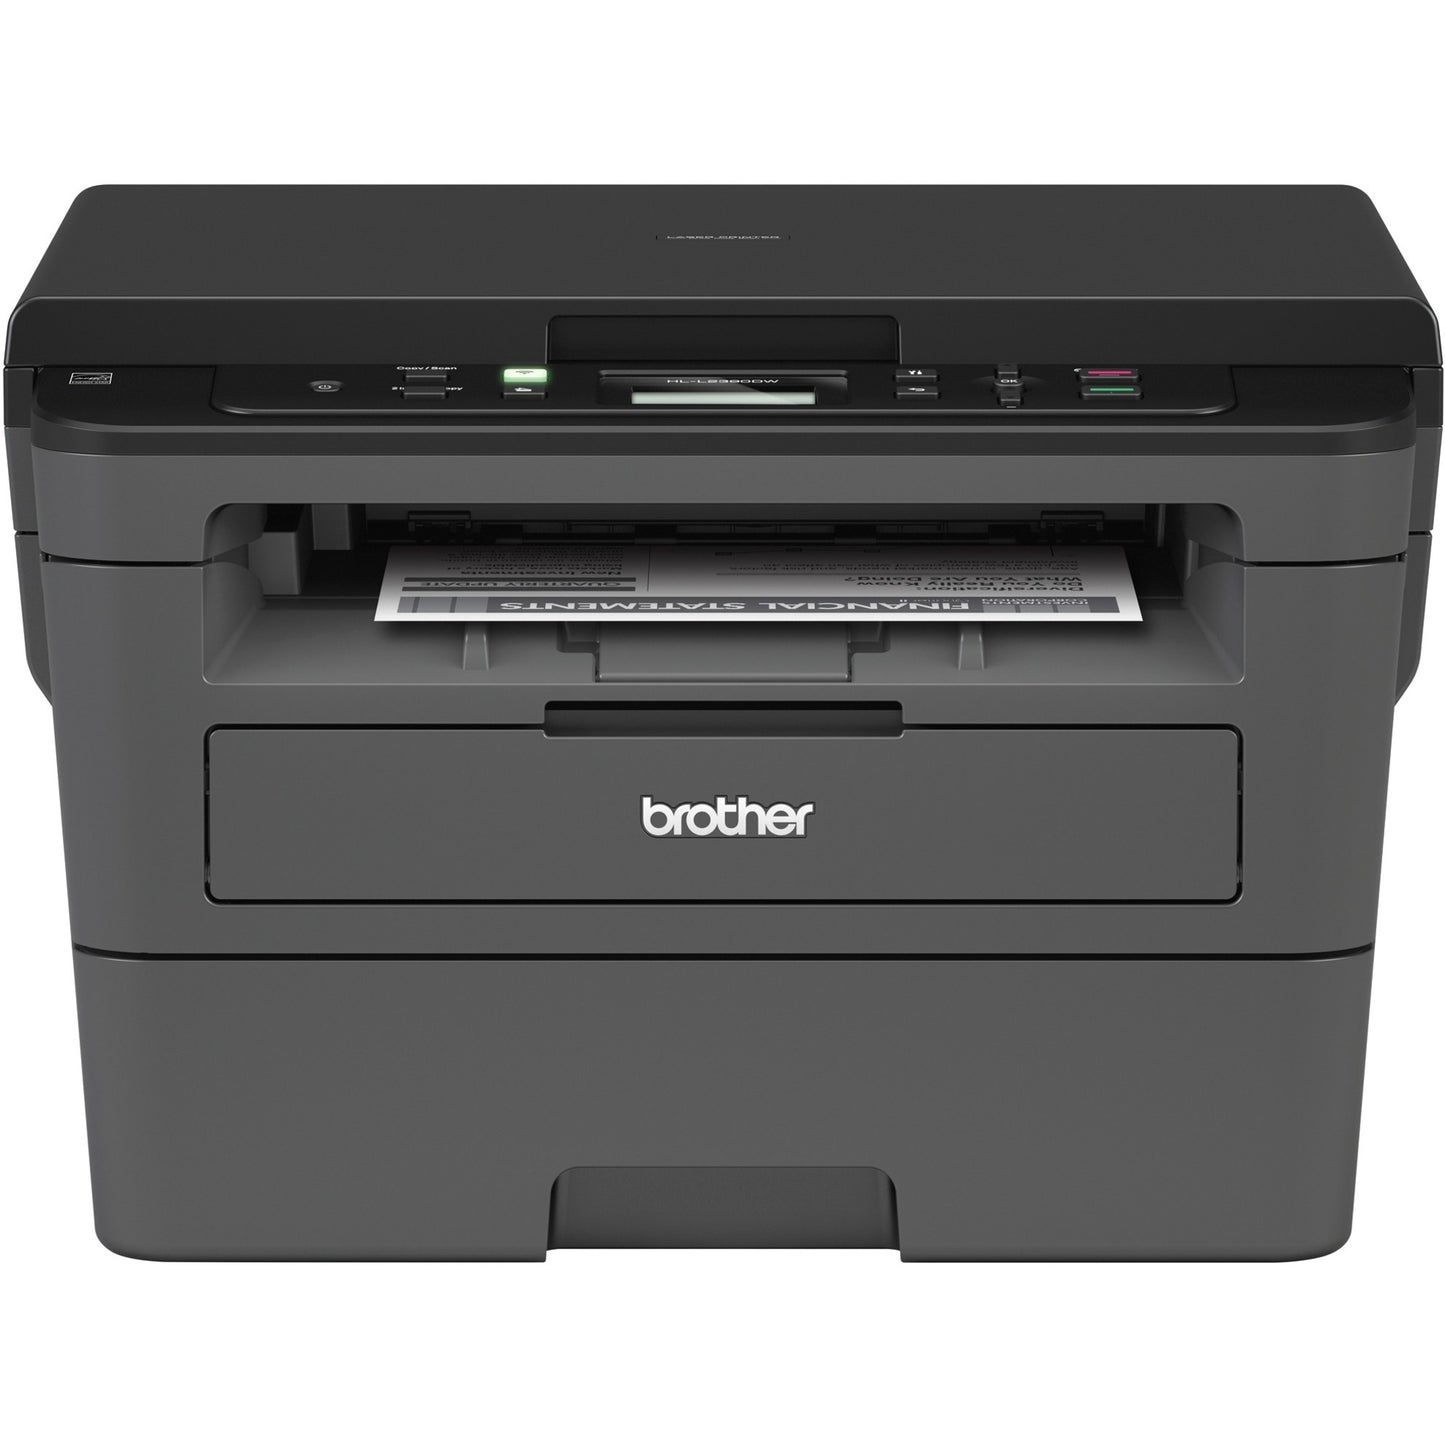 Brother HL-L2390DW Monochrome Laser Printer with Convenient Flatbed Copy & Scan-Duplex and Printing-Copier/Scanner-32 ppm Mono Print-2400x600 dpi Print-Automatic Duplex Print-1xInput Tray 250 Sheet-1200 dpi Optical Scan-251 sheets Input-Wireless LAN